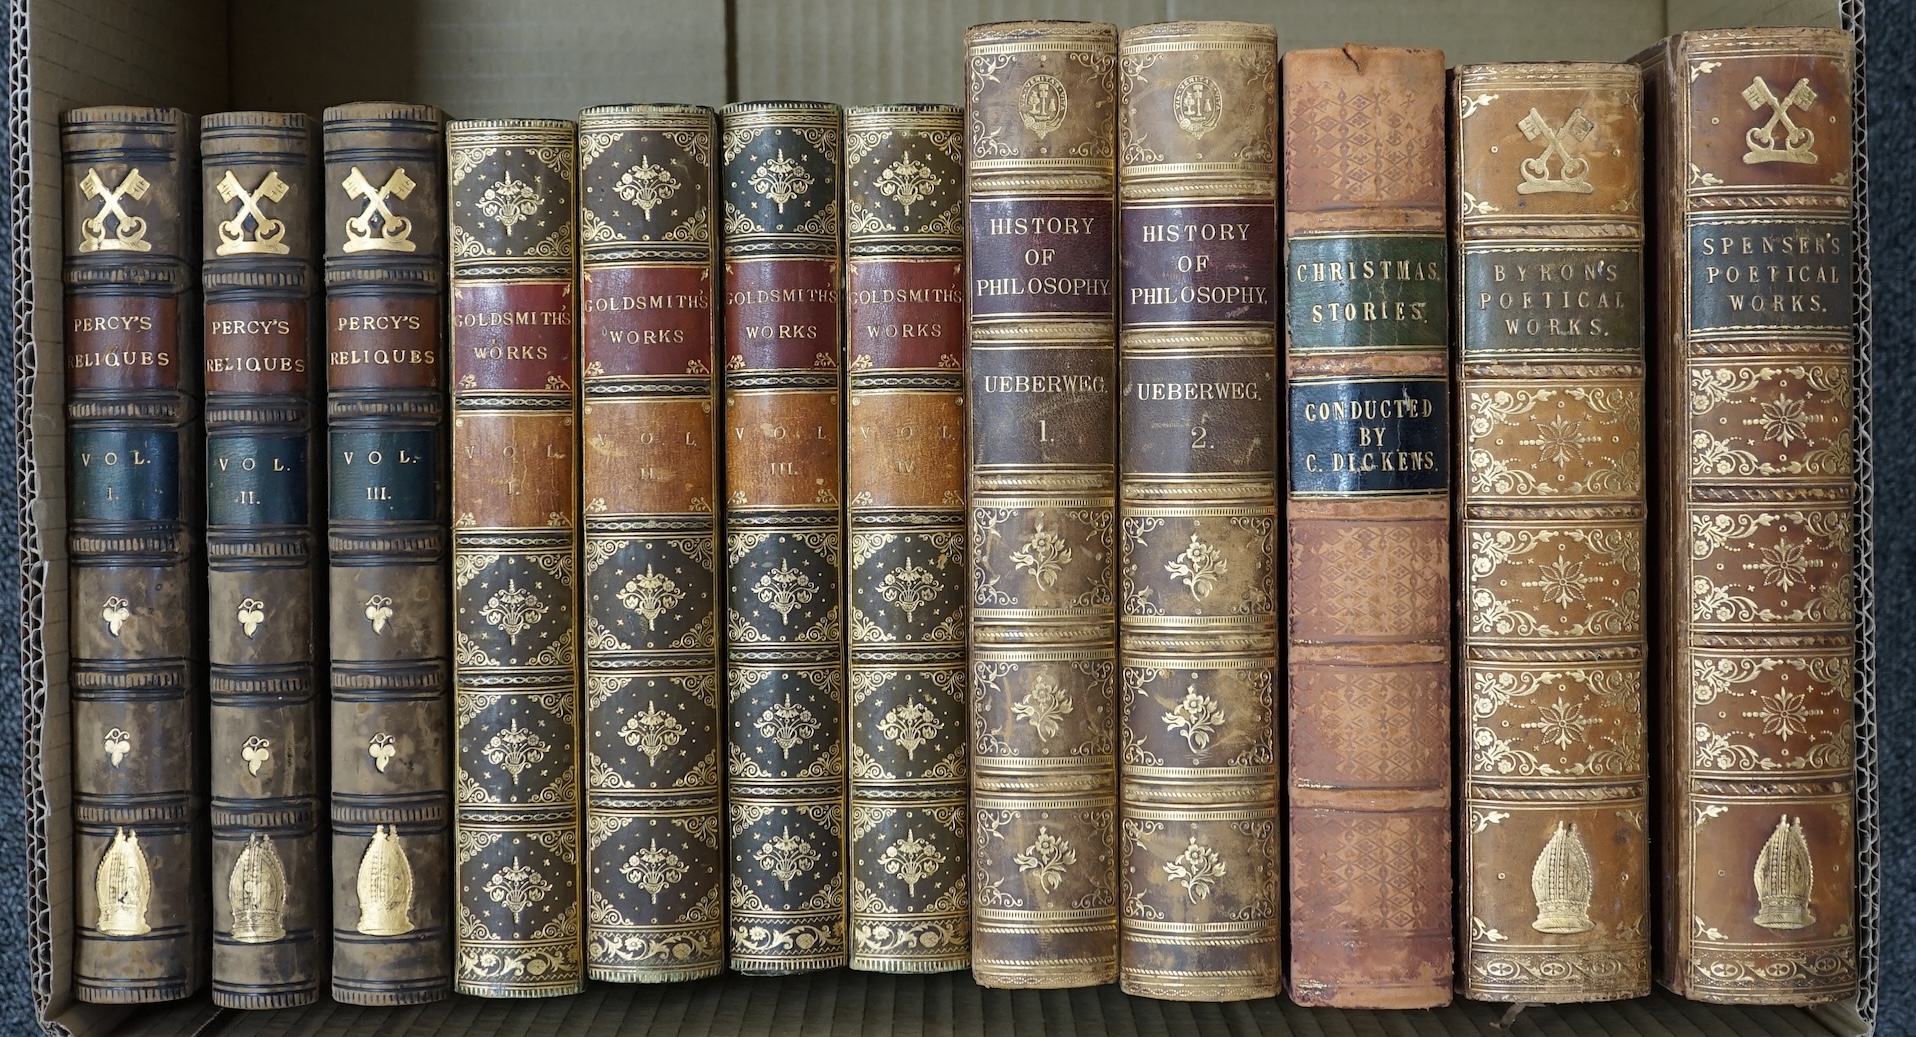 Bindings; Morton, John C. - Cyclopedia of Agriculture, 1863, 2 vols. Byron - Poetical Works, 1870. Spenser, E. -Works 1869. Imperial Dictionary 1850, vol II only. Goldsmith's Works 1854, 4vols, Godolphin School Prize. Di